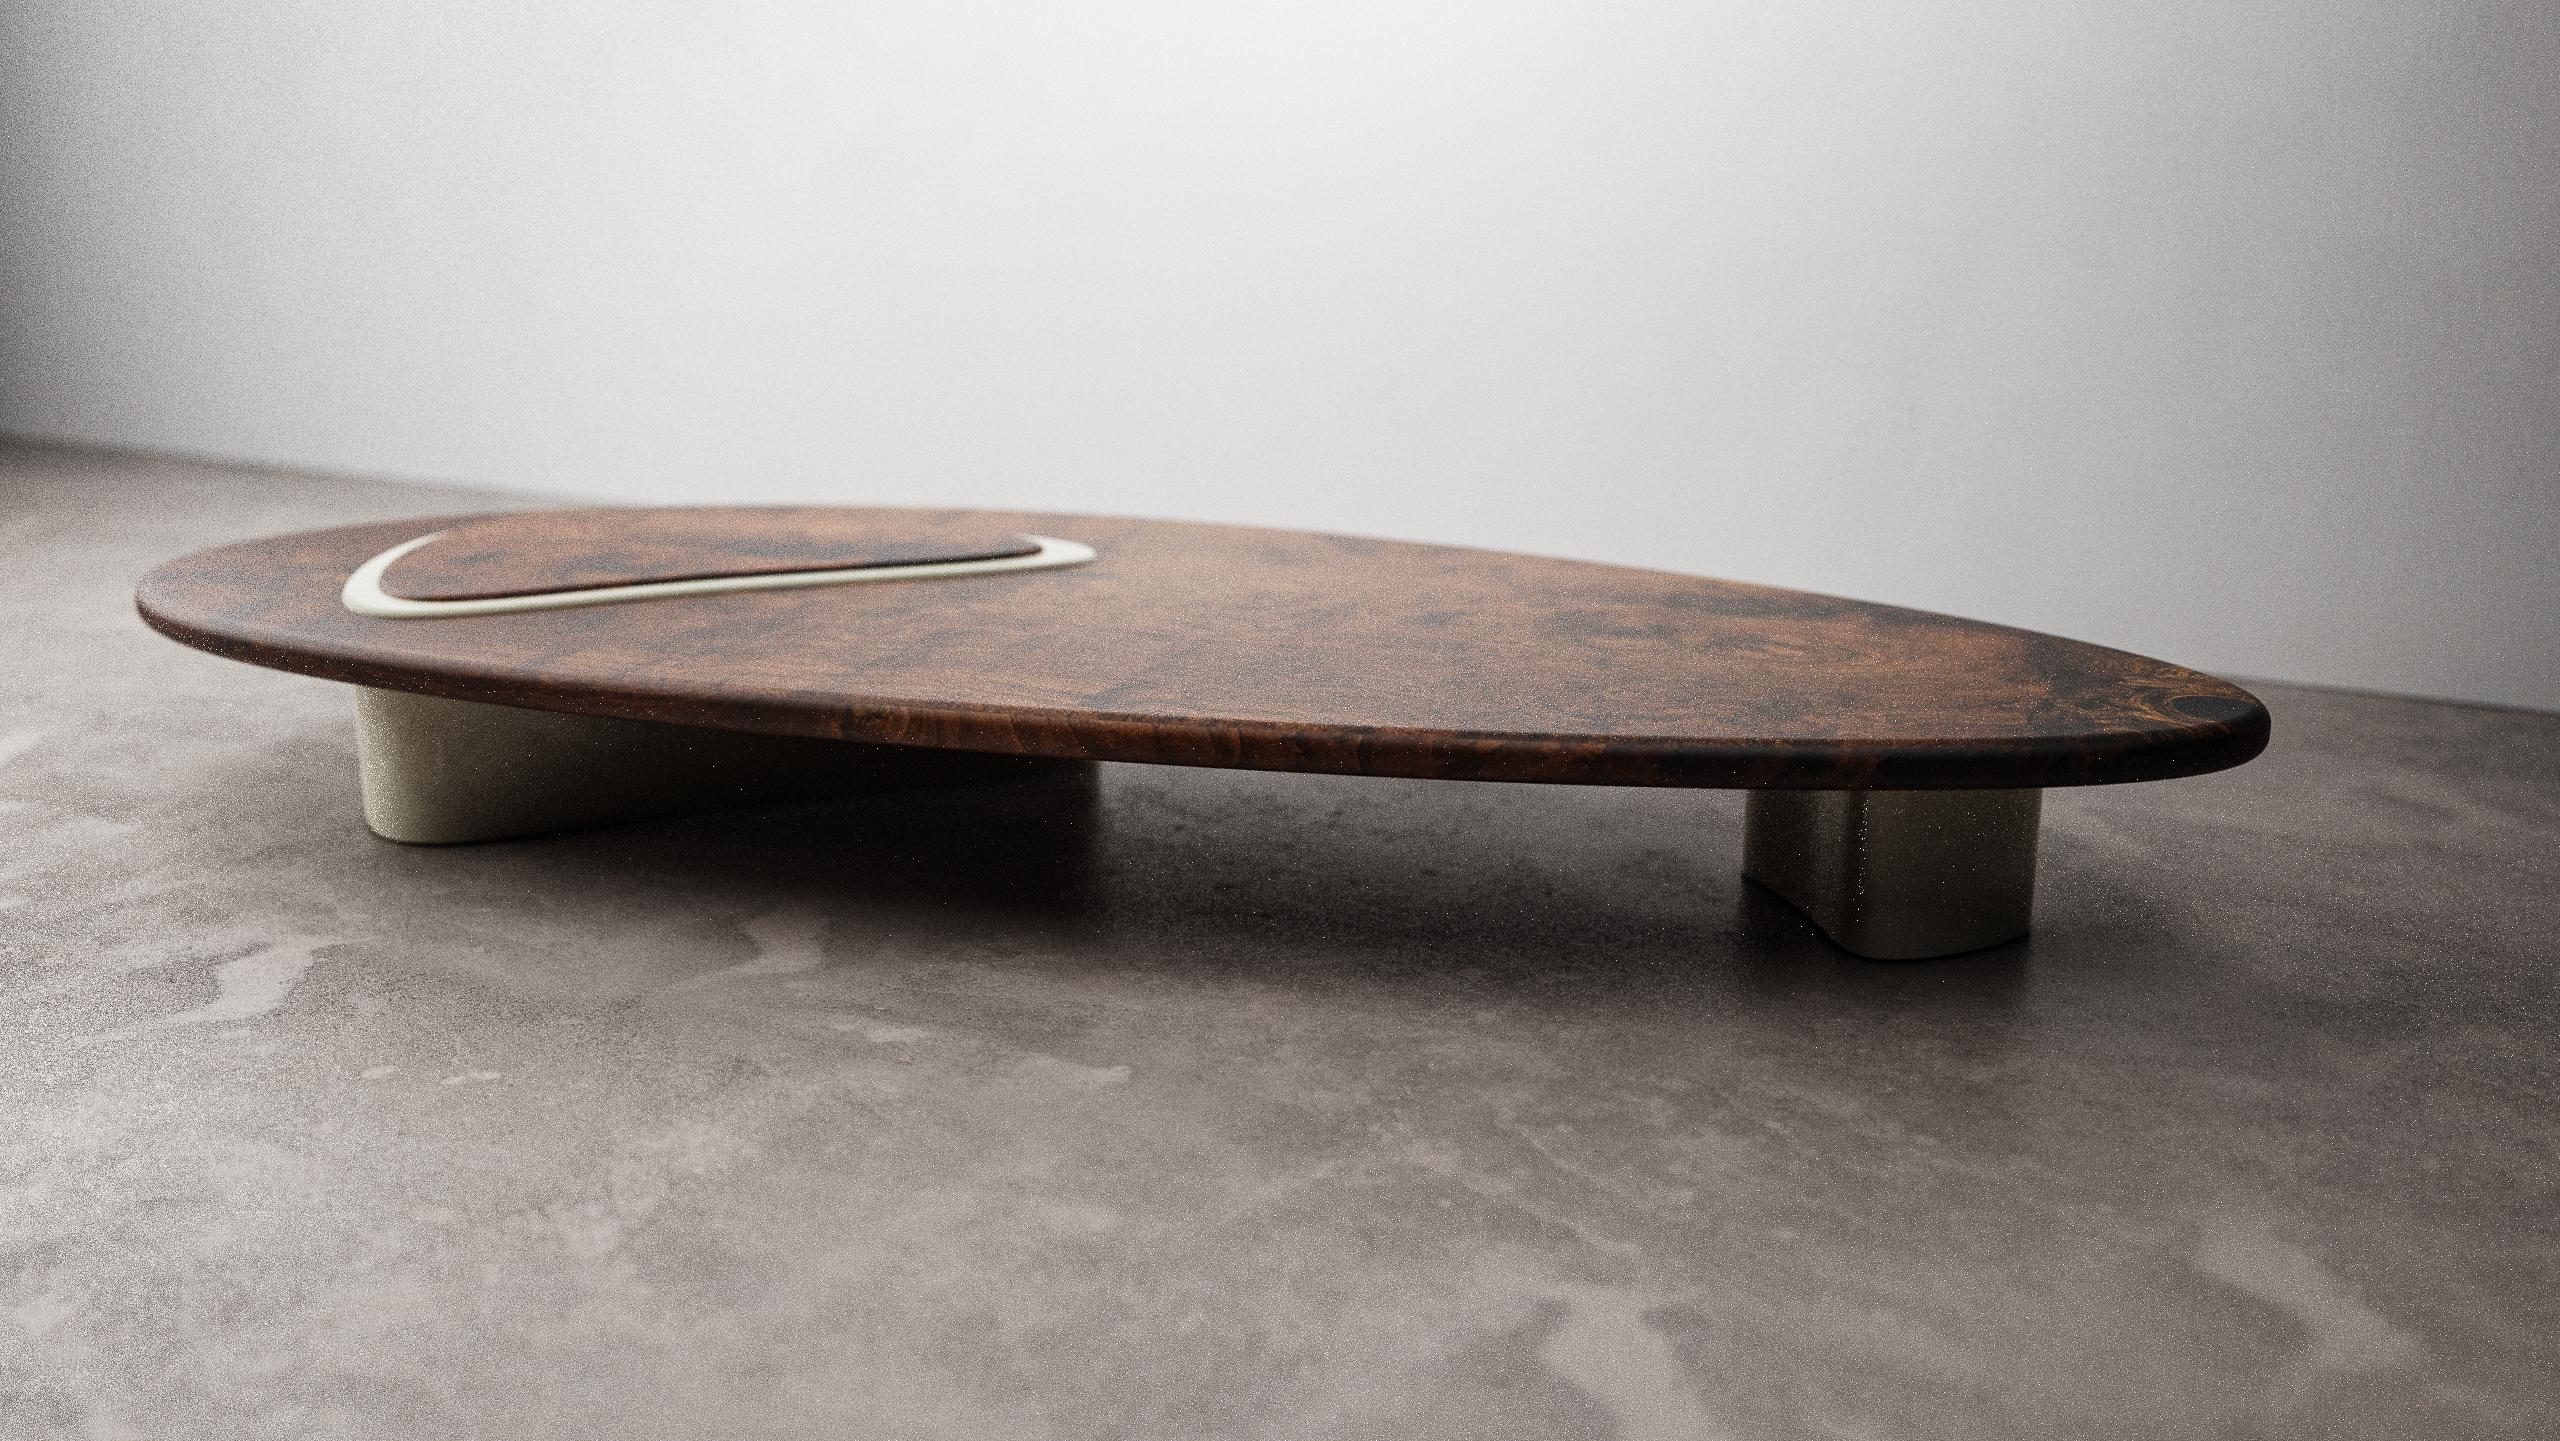 The Tehama coffee table by Christopher Mark is a hand crafted one of one piece. The table top is a solid Claro walnut slab that has been formed to an organic shape mimicking the walnut twig beetle, the tree's biggest adversary. The legs of the table